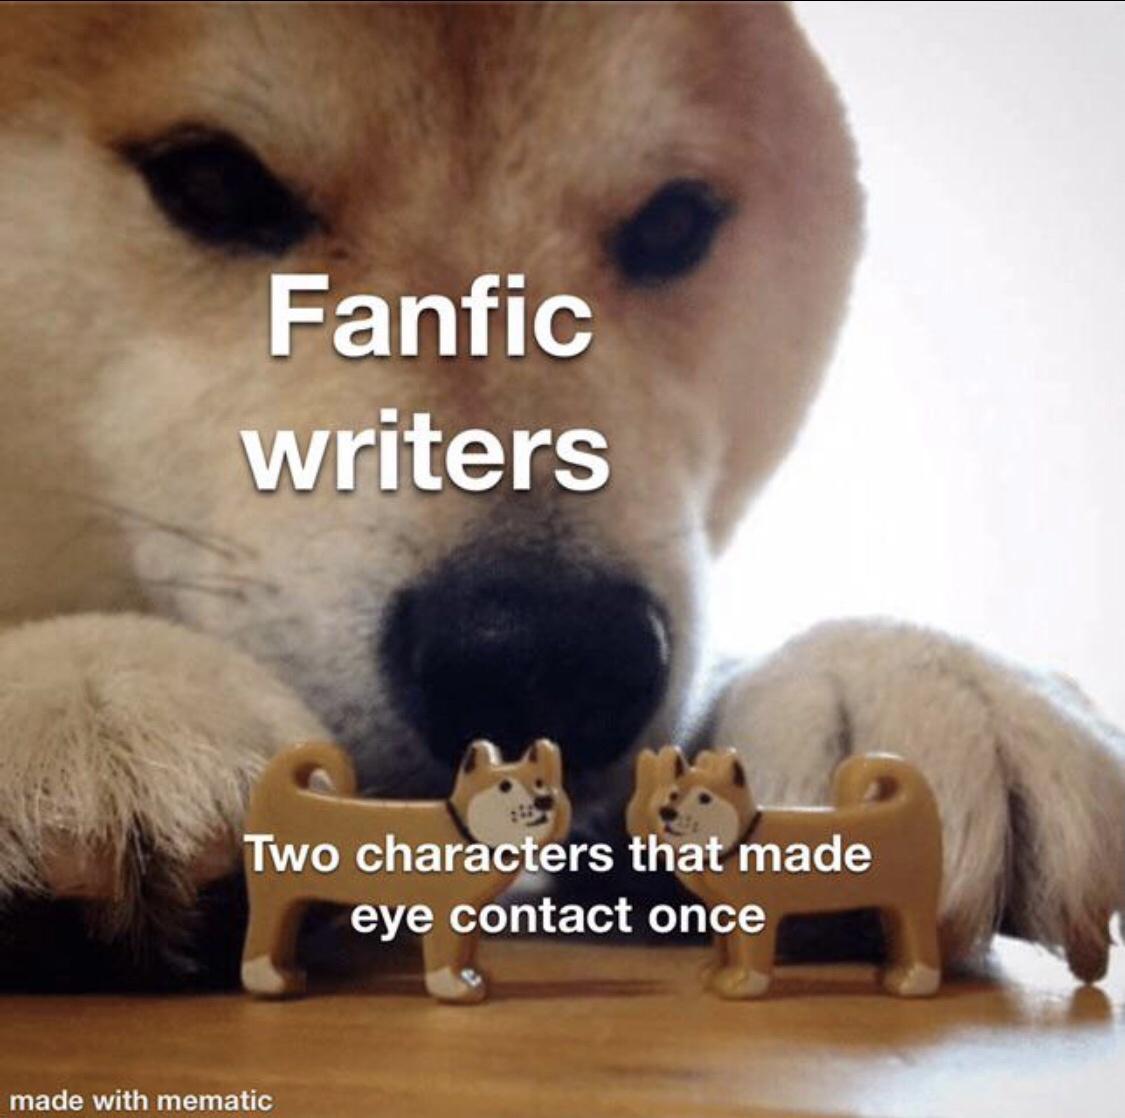 now kiss meme dog - Fanfic writers Two characters that made eye contact once made with mematic